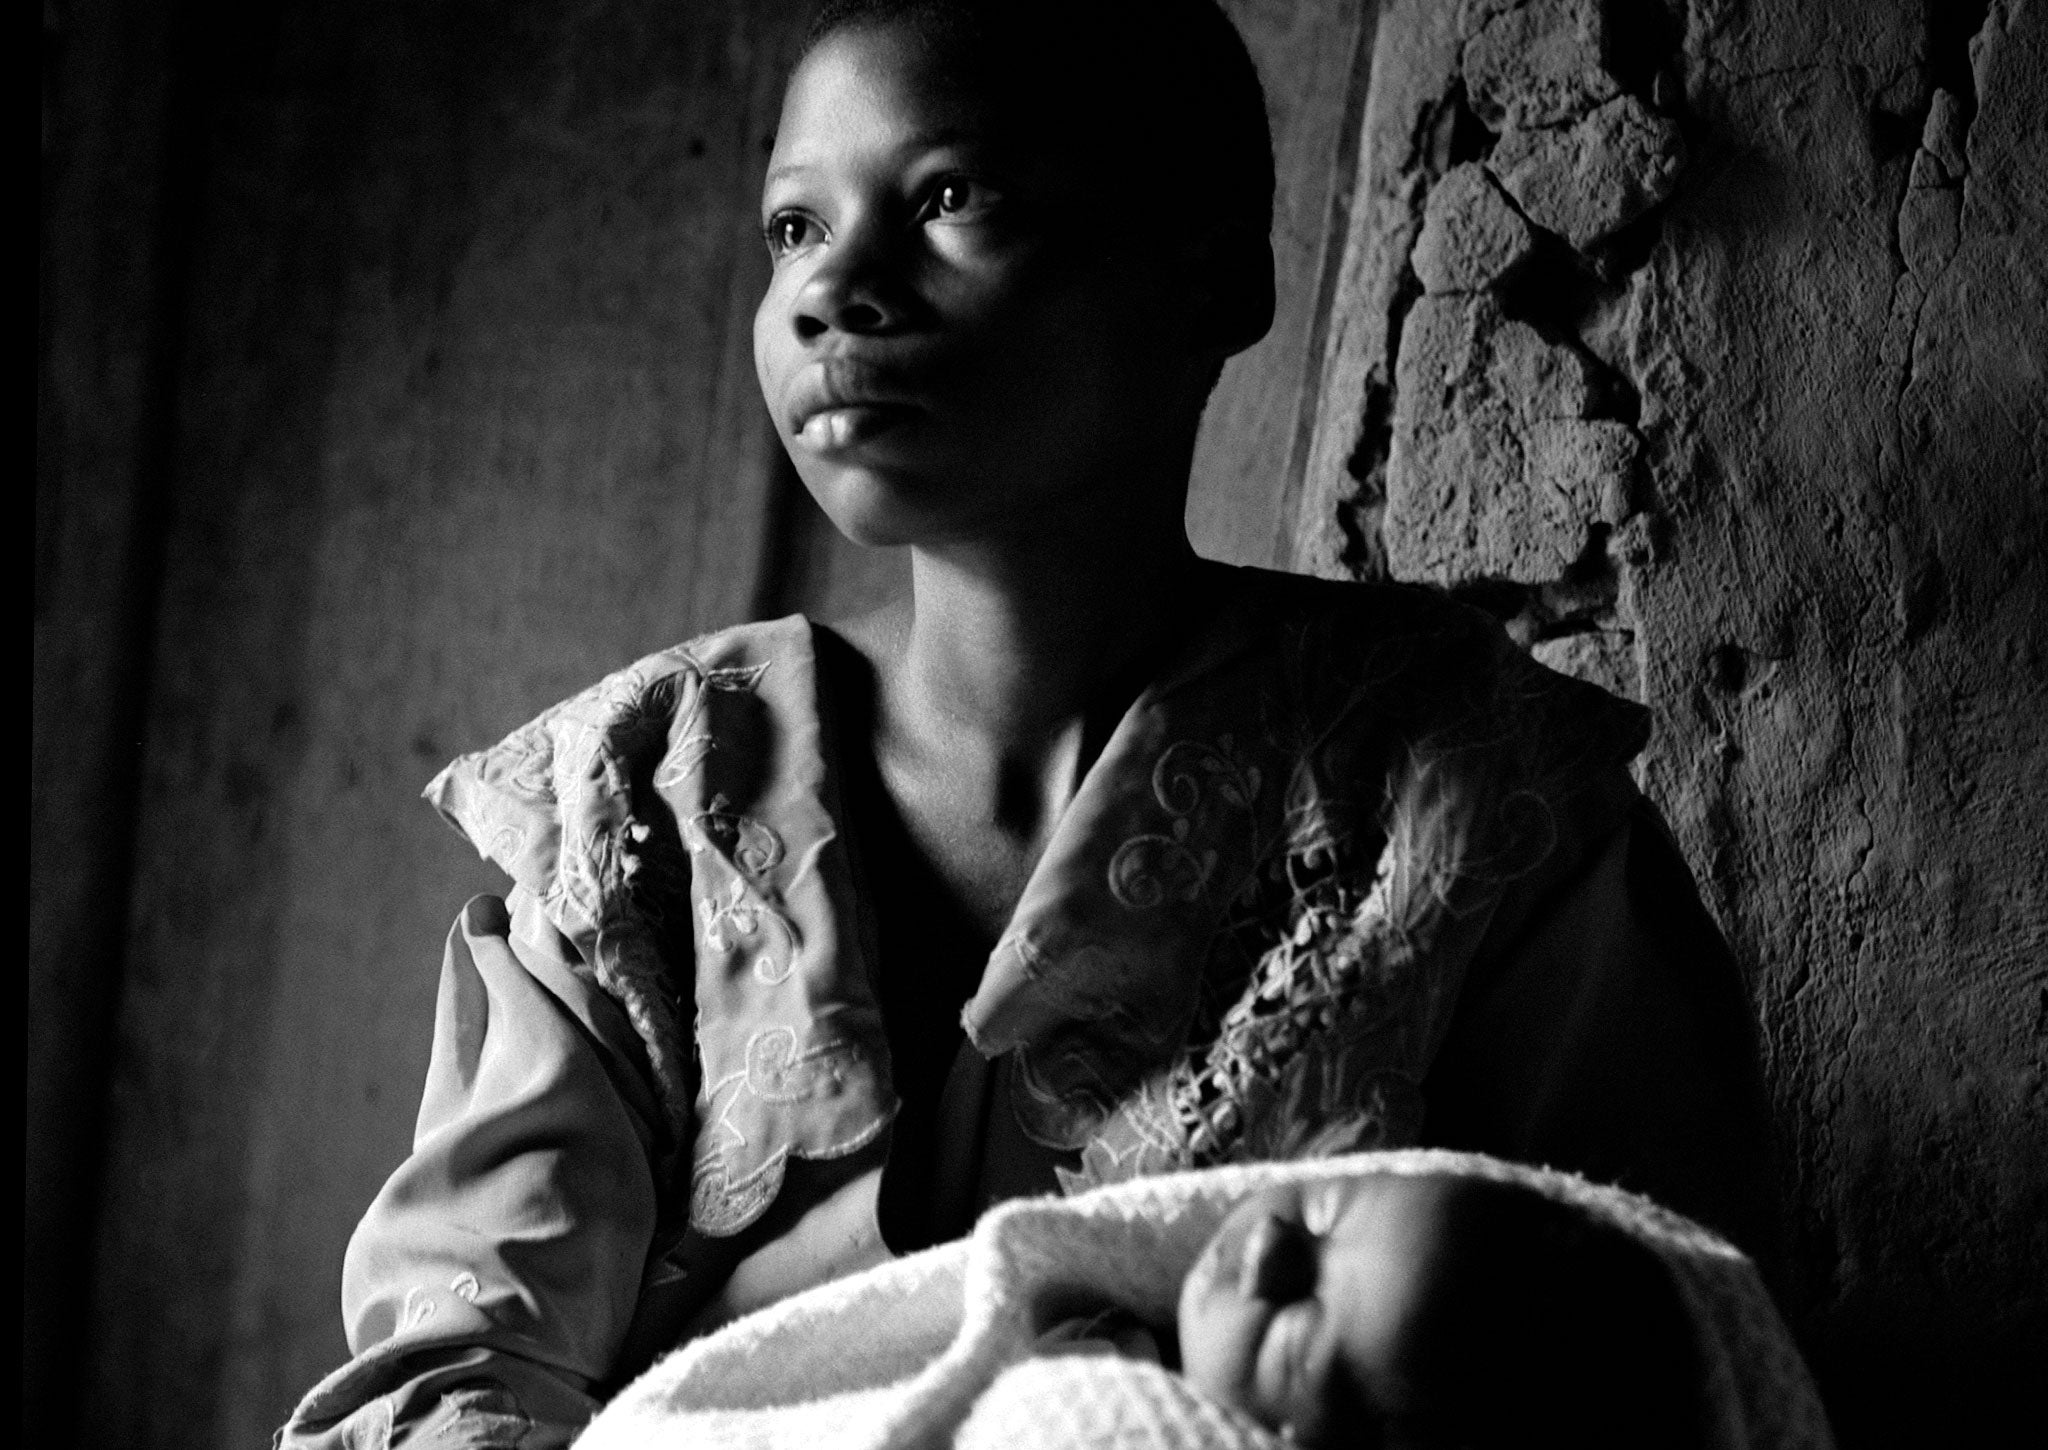 19 year-old Brigitte with her baby boy Damas, conceived when she was raped. Damas died shortly after this was taken. Photograph by Fiona Lloyd-Davies